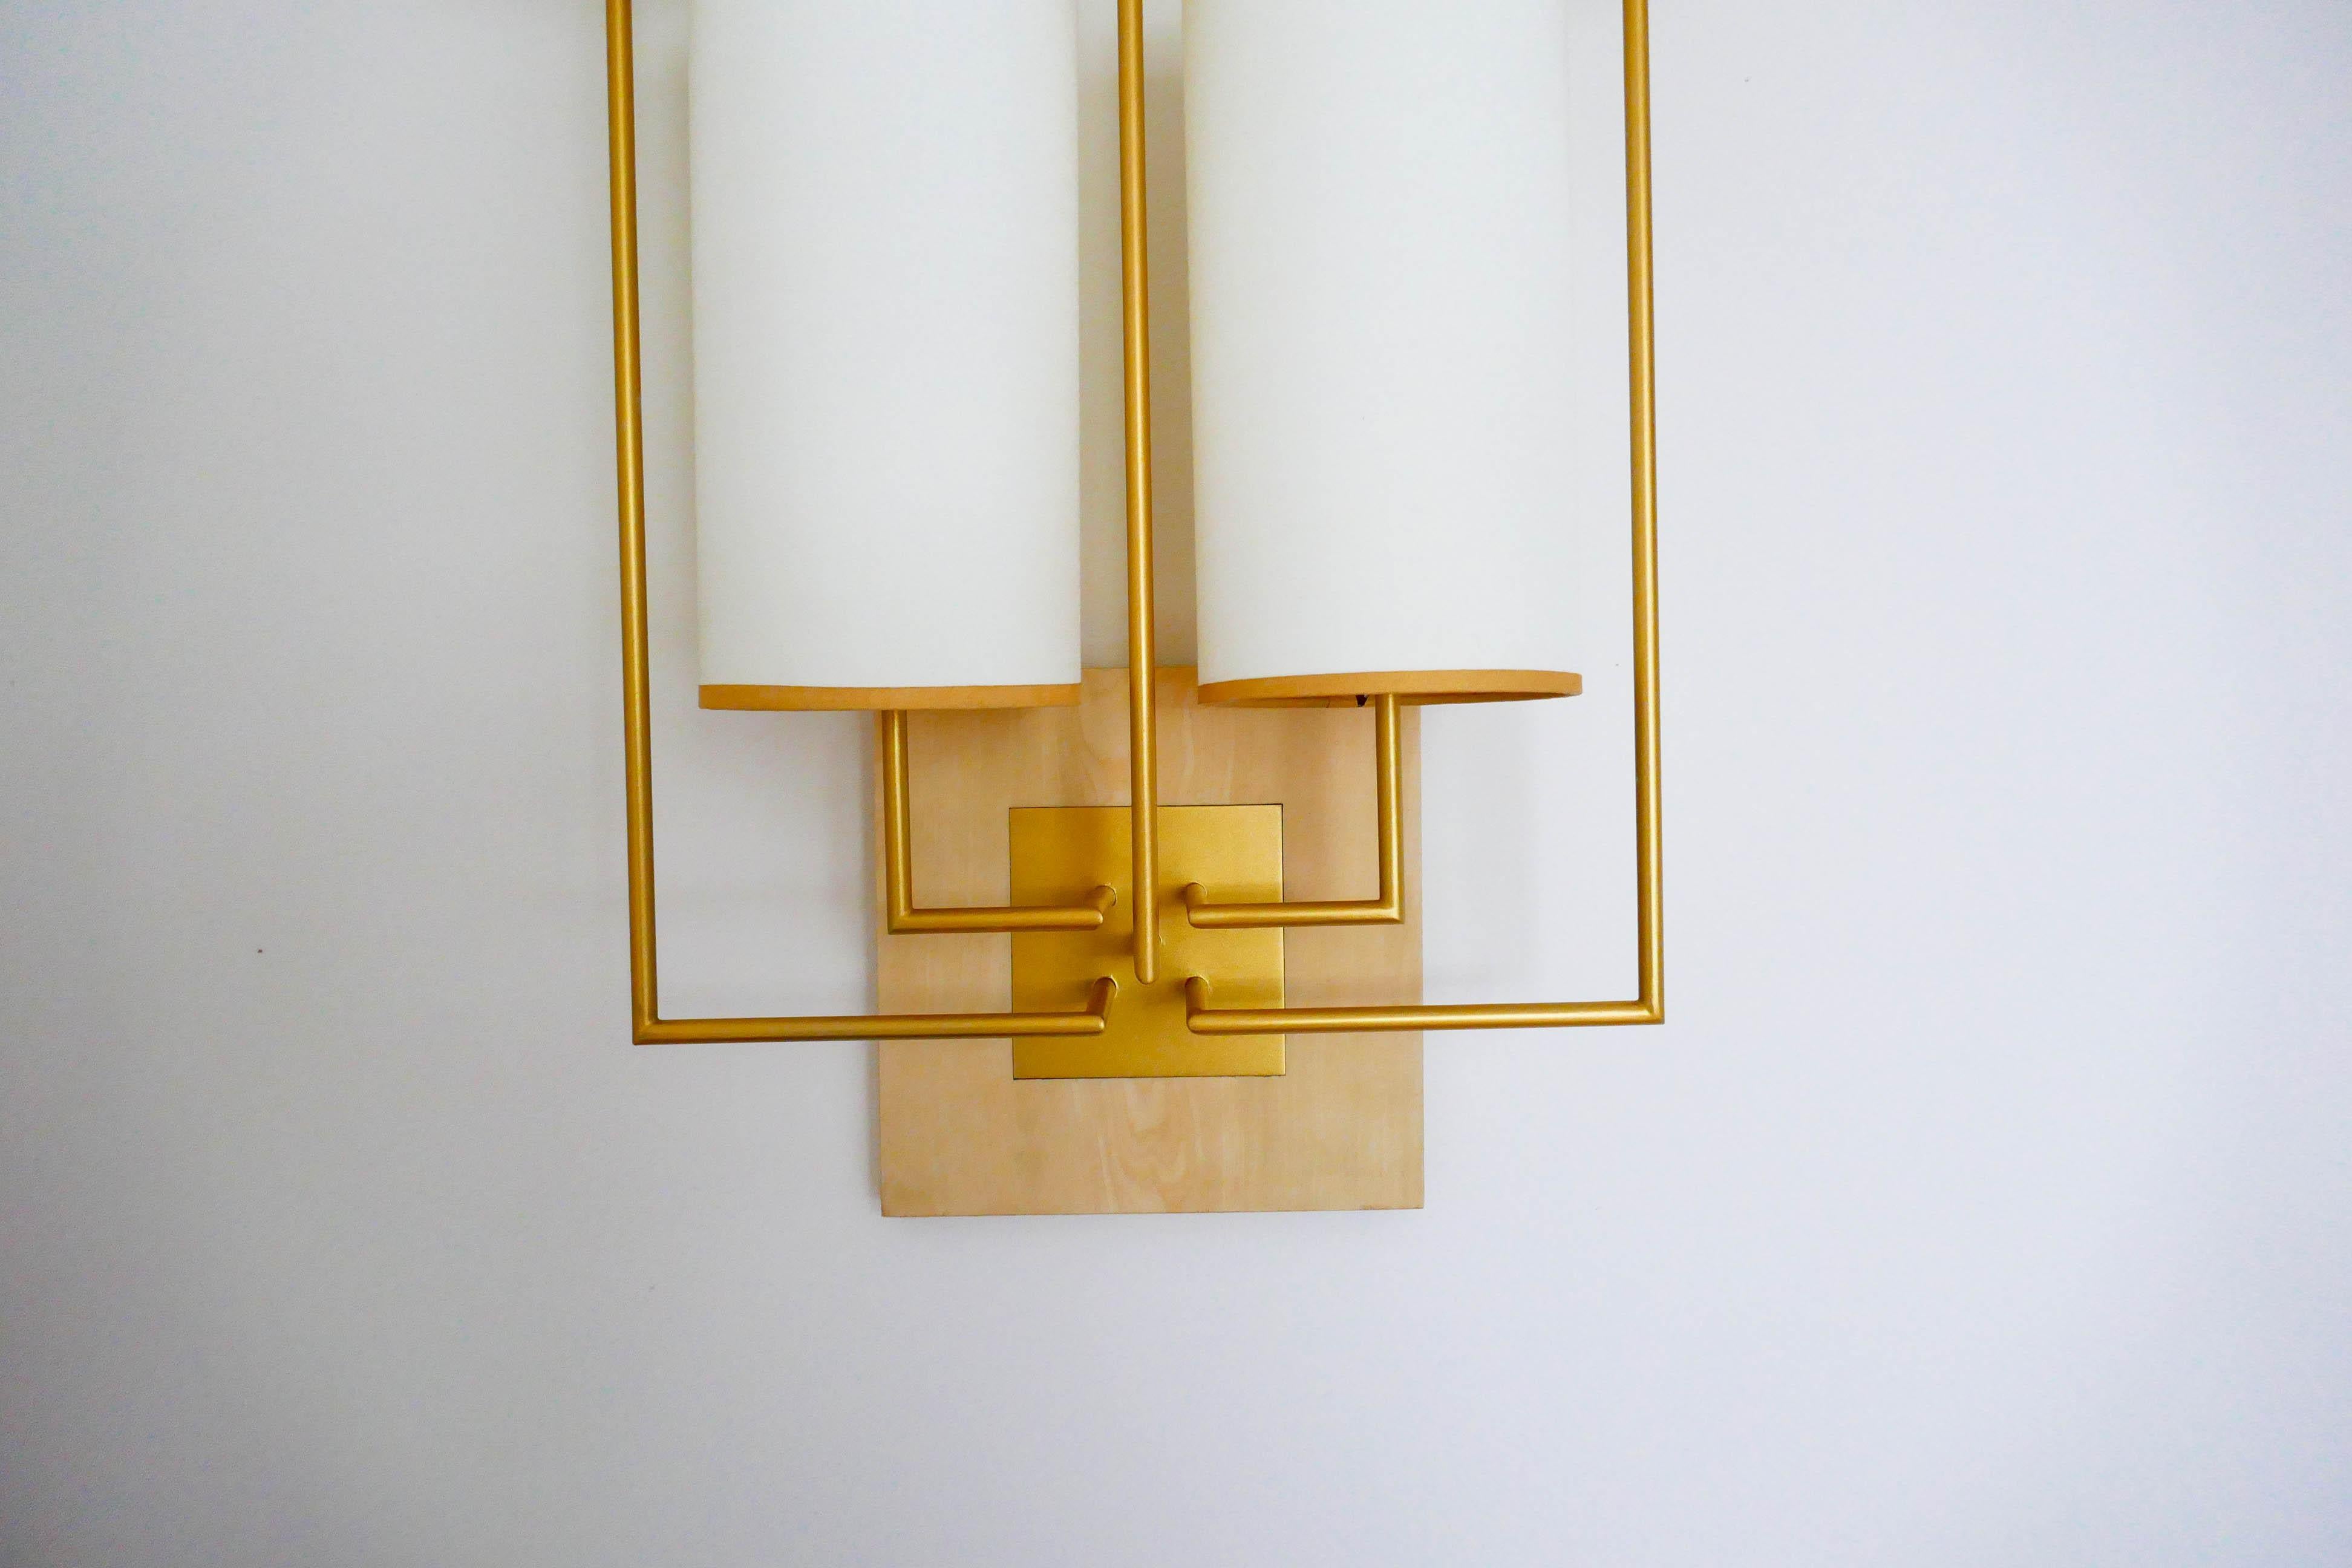 Pair of Wall Lamp Sconce in Gold Patina and White Fabric  Lamp Shades For Sale 1